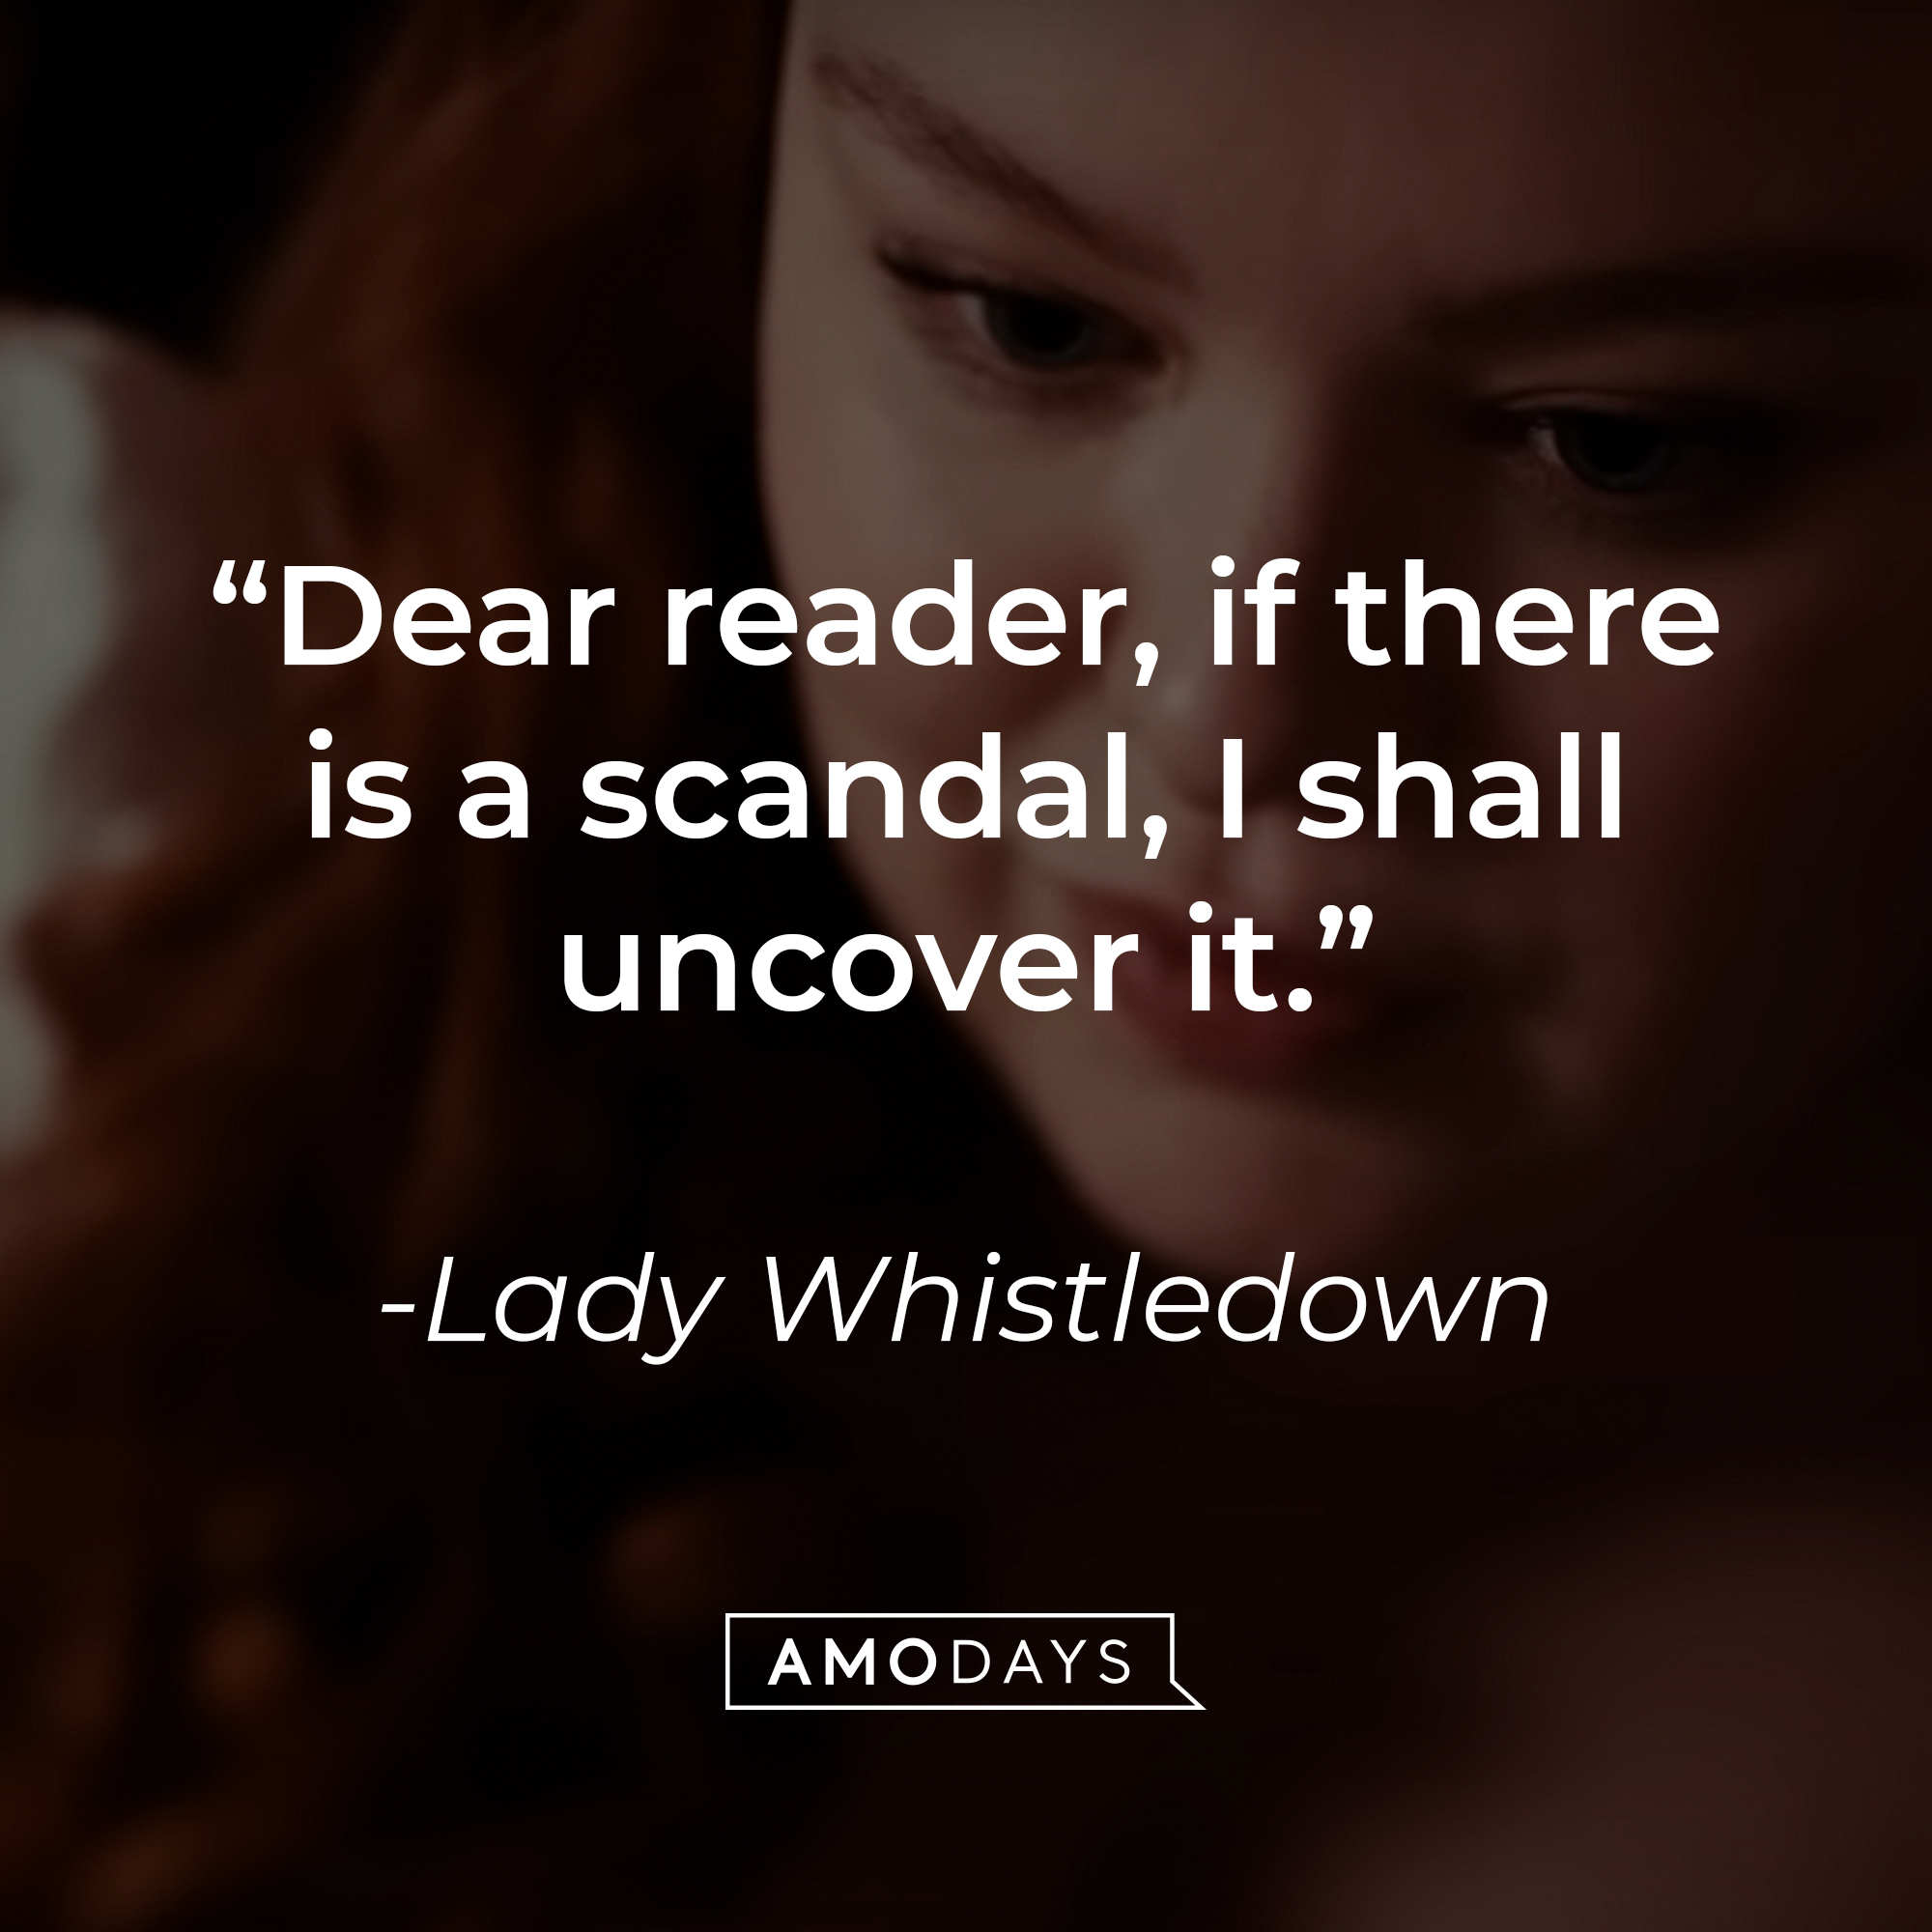 Lady Whistledown's quote: "Dear reader, if there is a scandal, I shall uncover it." | Source: Youtube.com/Netflix